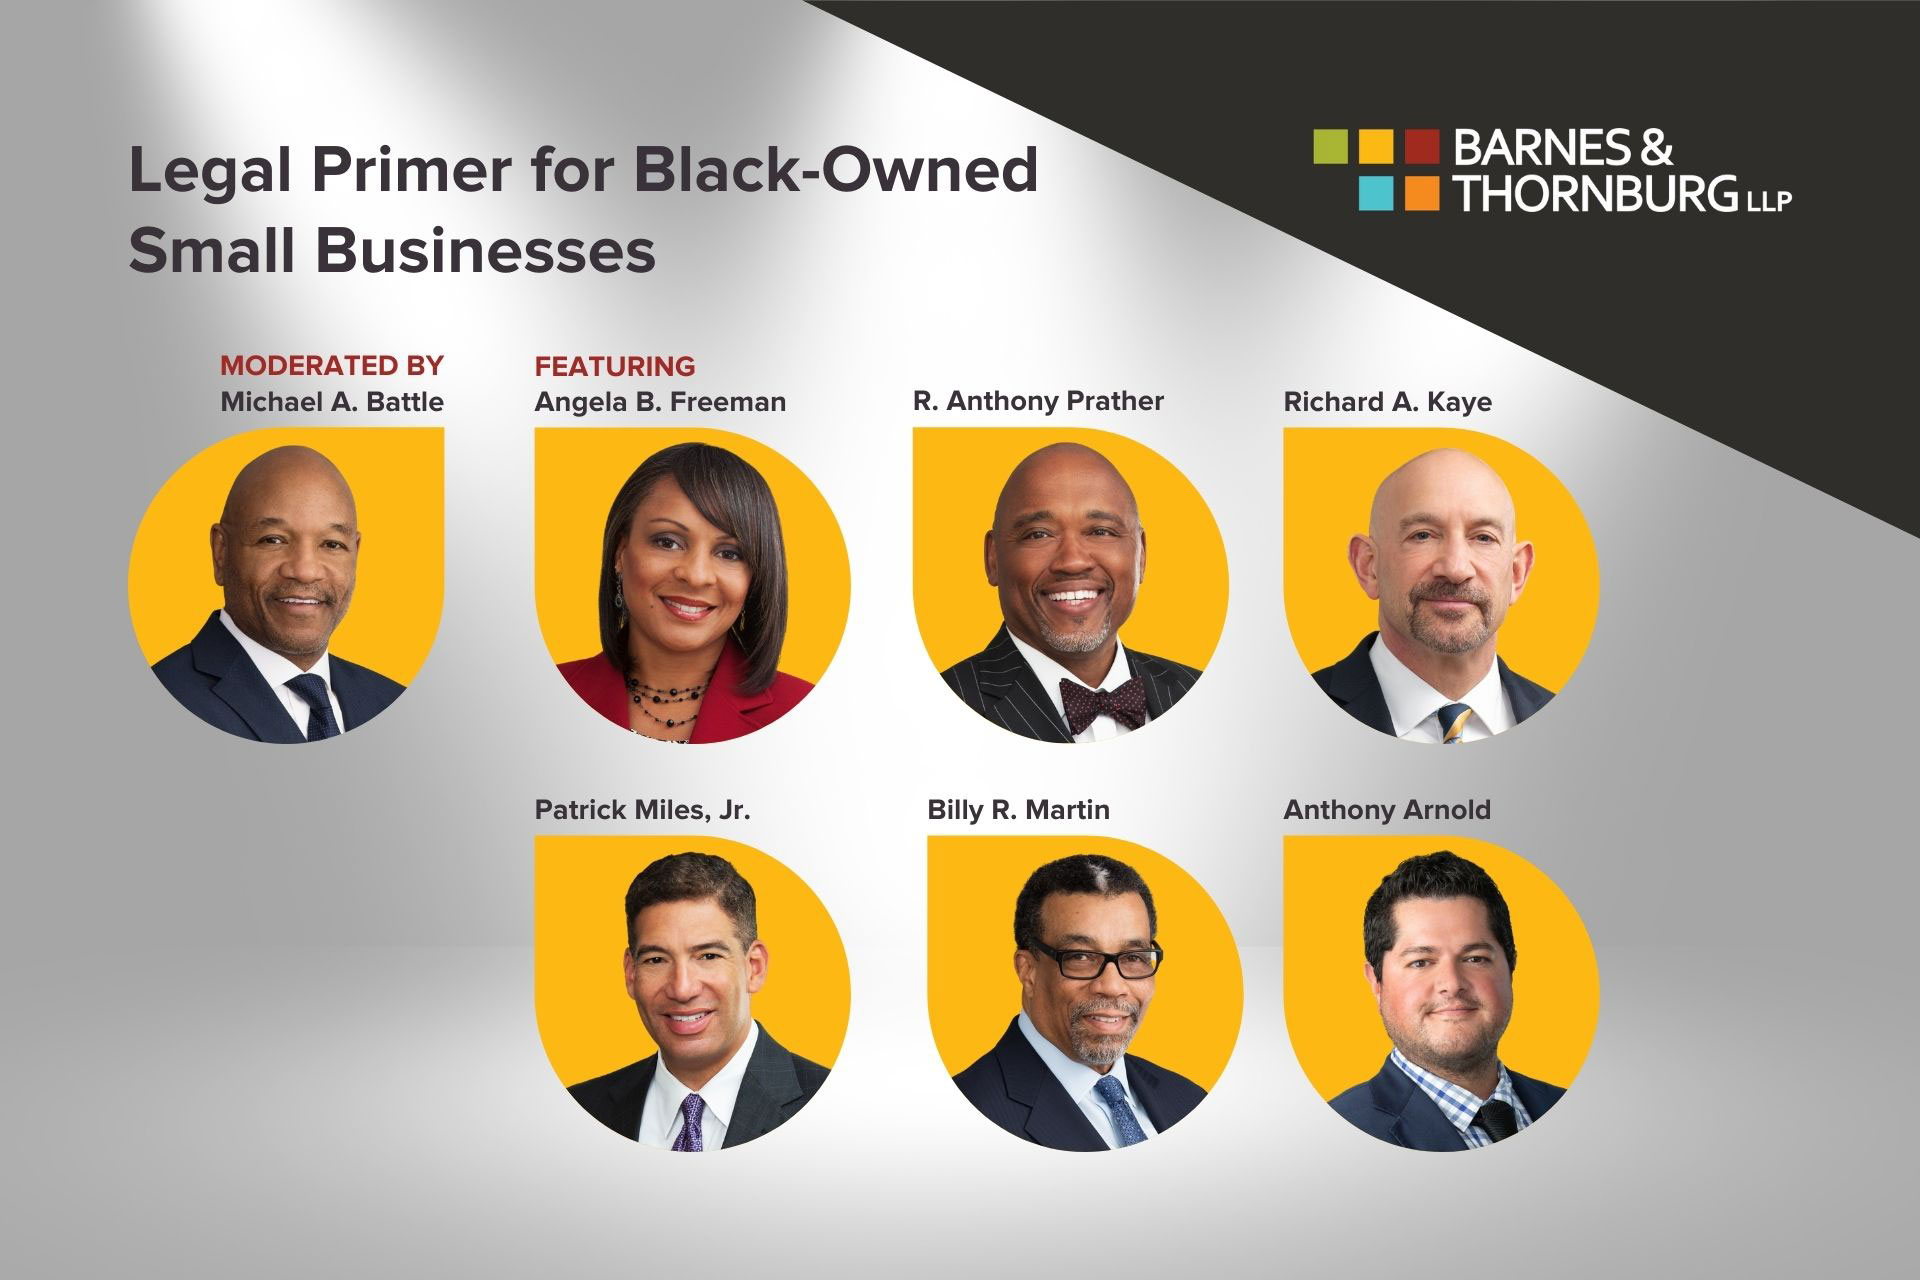 Legal Primer for Black-Owned Small Businesses